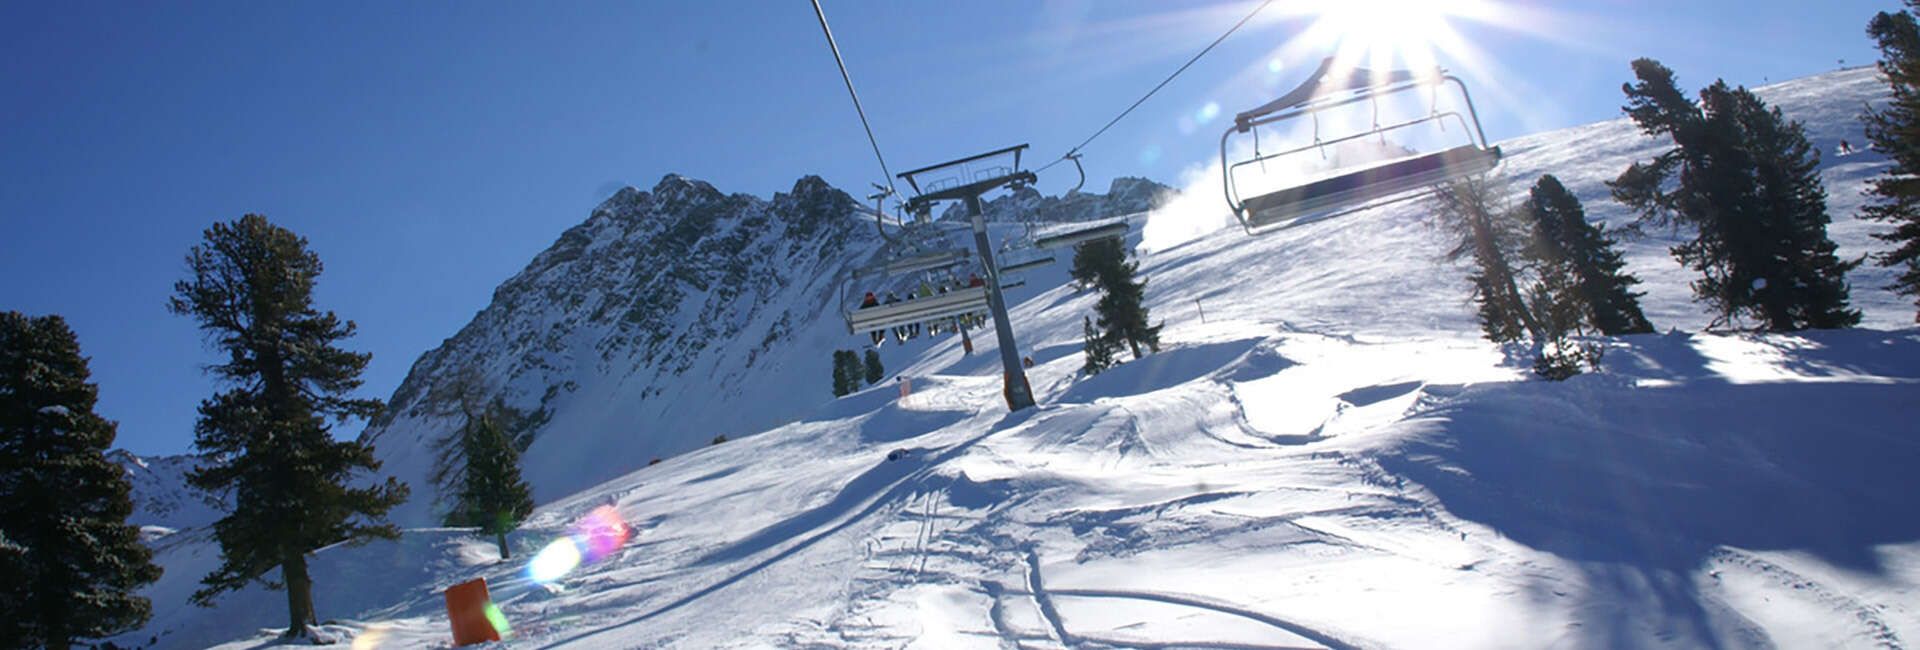  Winter with chairlift in Nauders